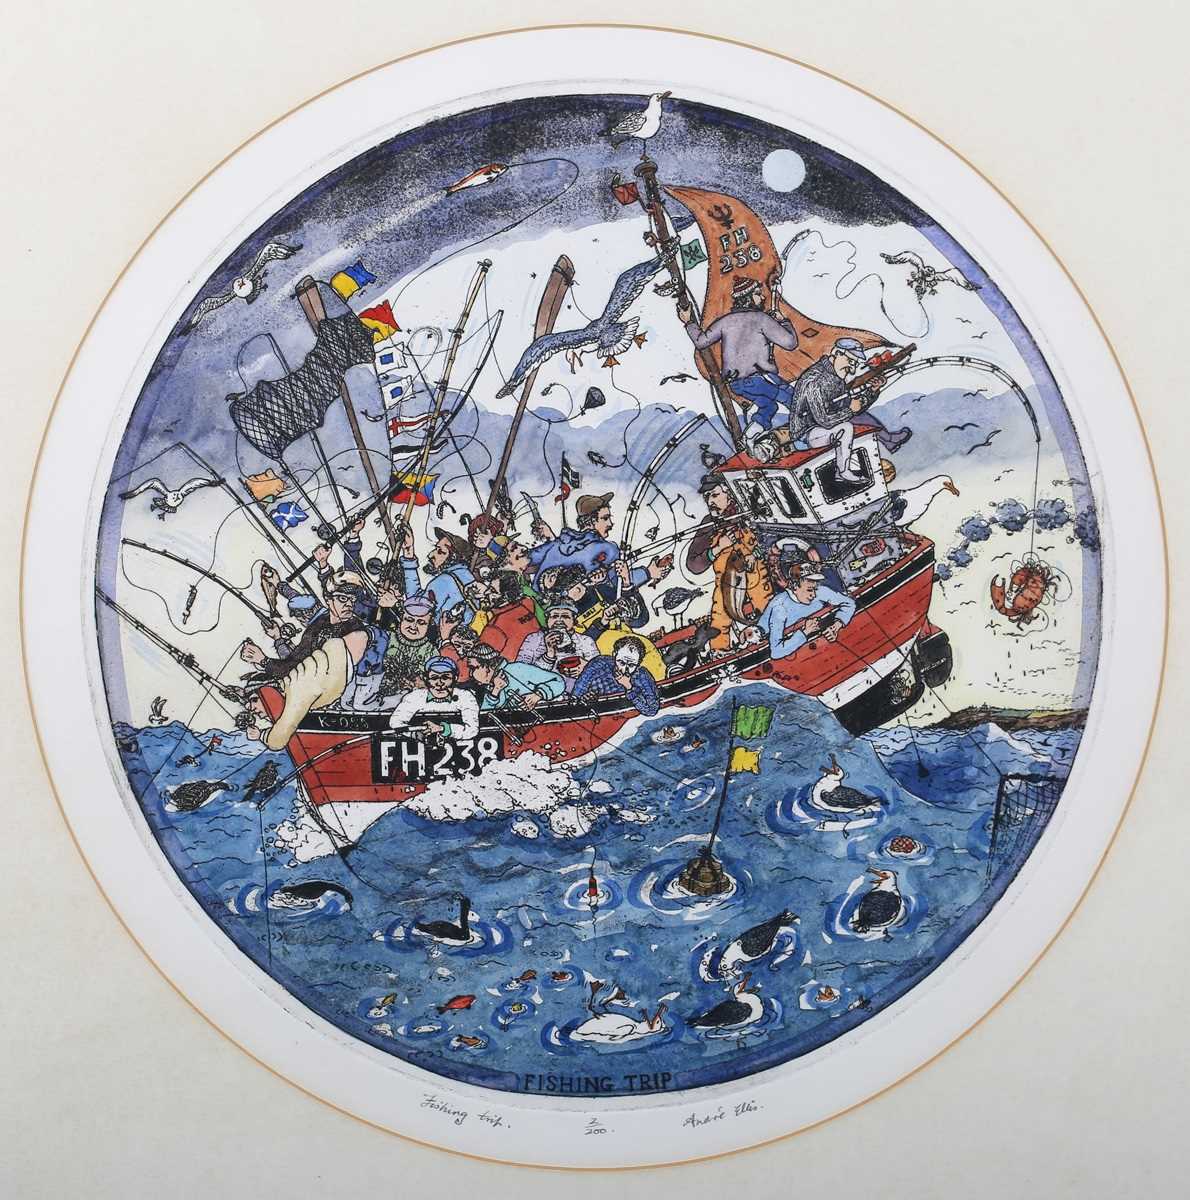 Andre Ellis – ‘Fishing Trip’ and ‘Tiddly Tom Tope’, a pair of 20th century etchings with hand-